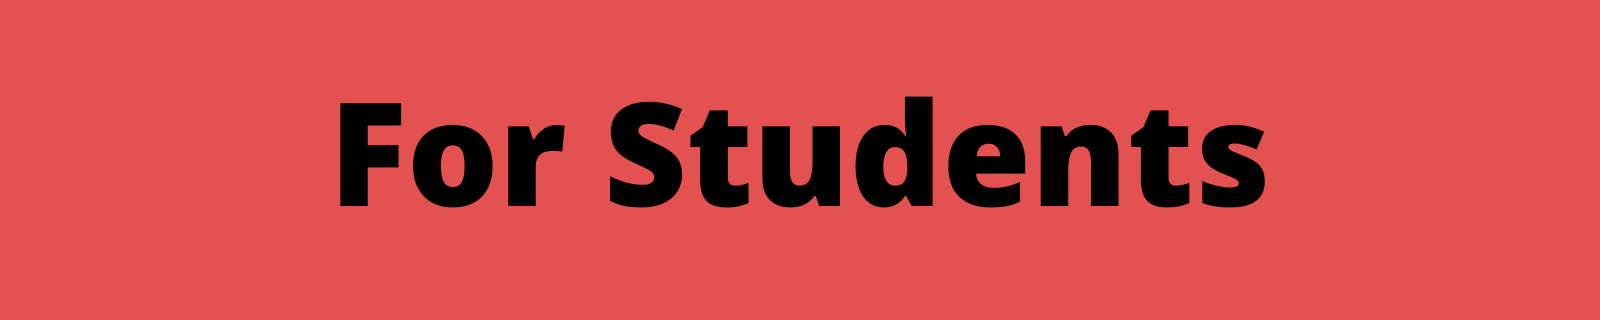 header that reads "for students"